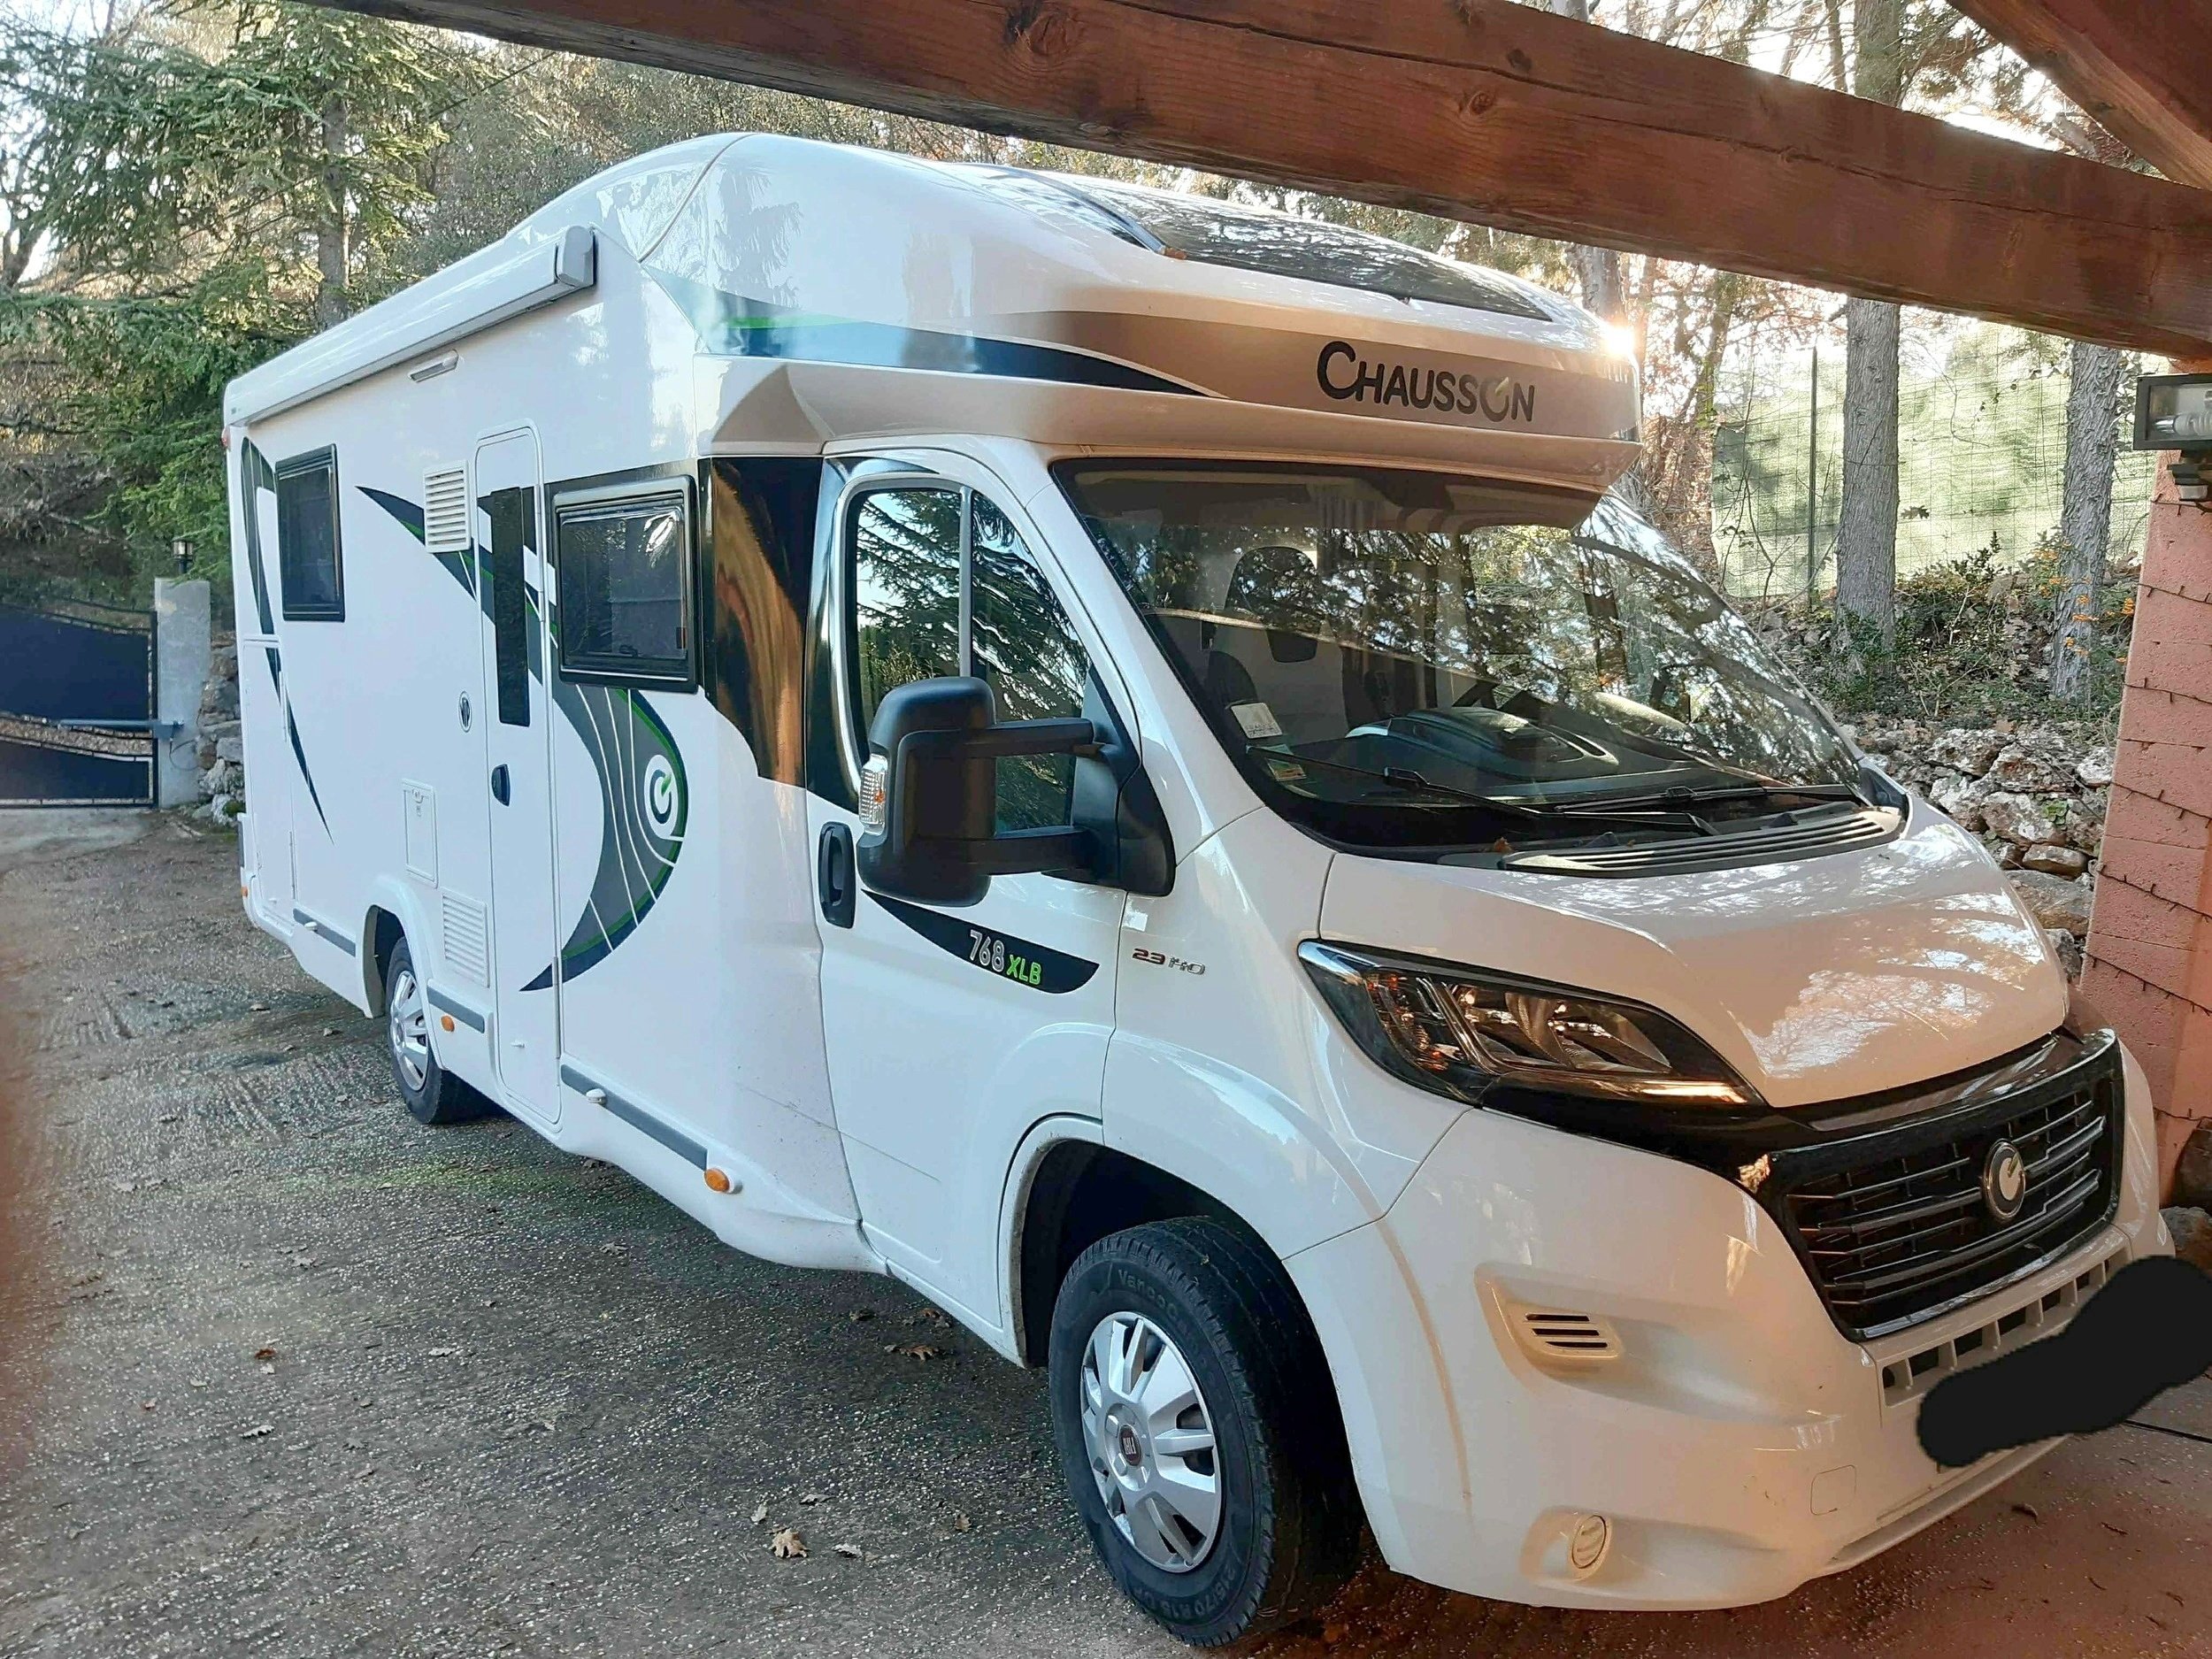 Picture of Chausson 768 xlb